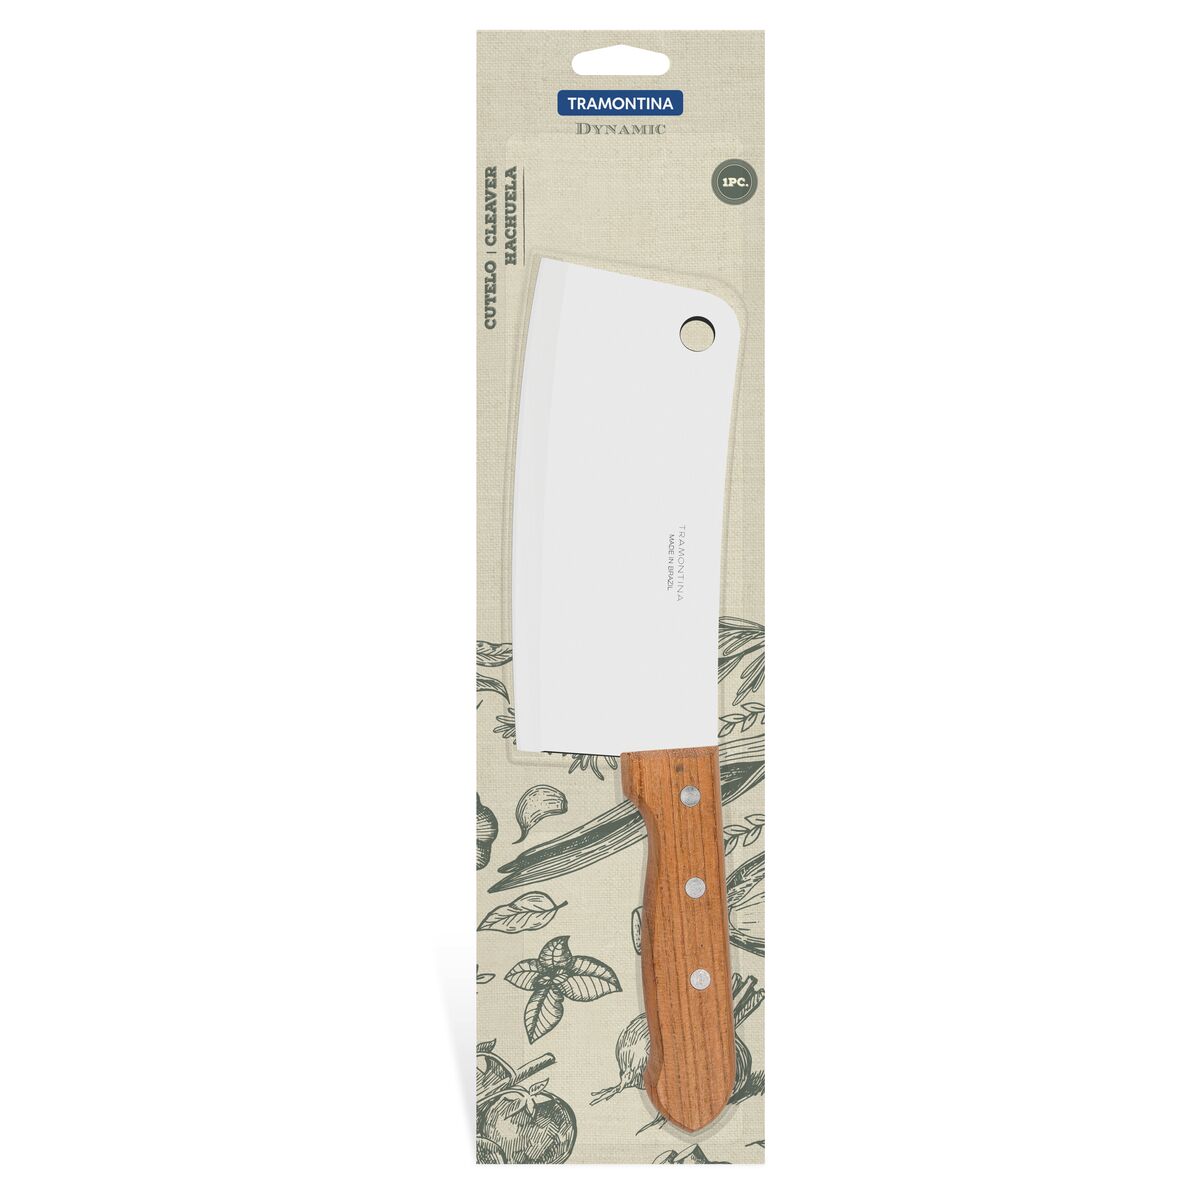 Tramontina Cleaver Knife 7" - 22328/107